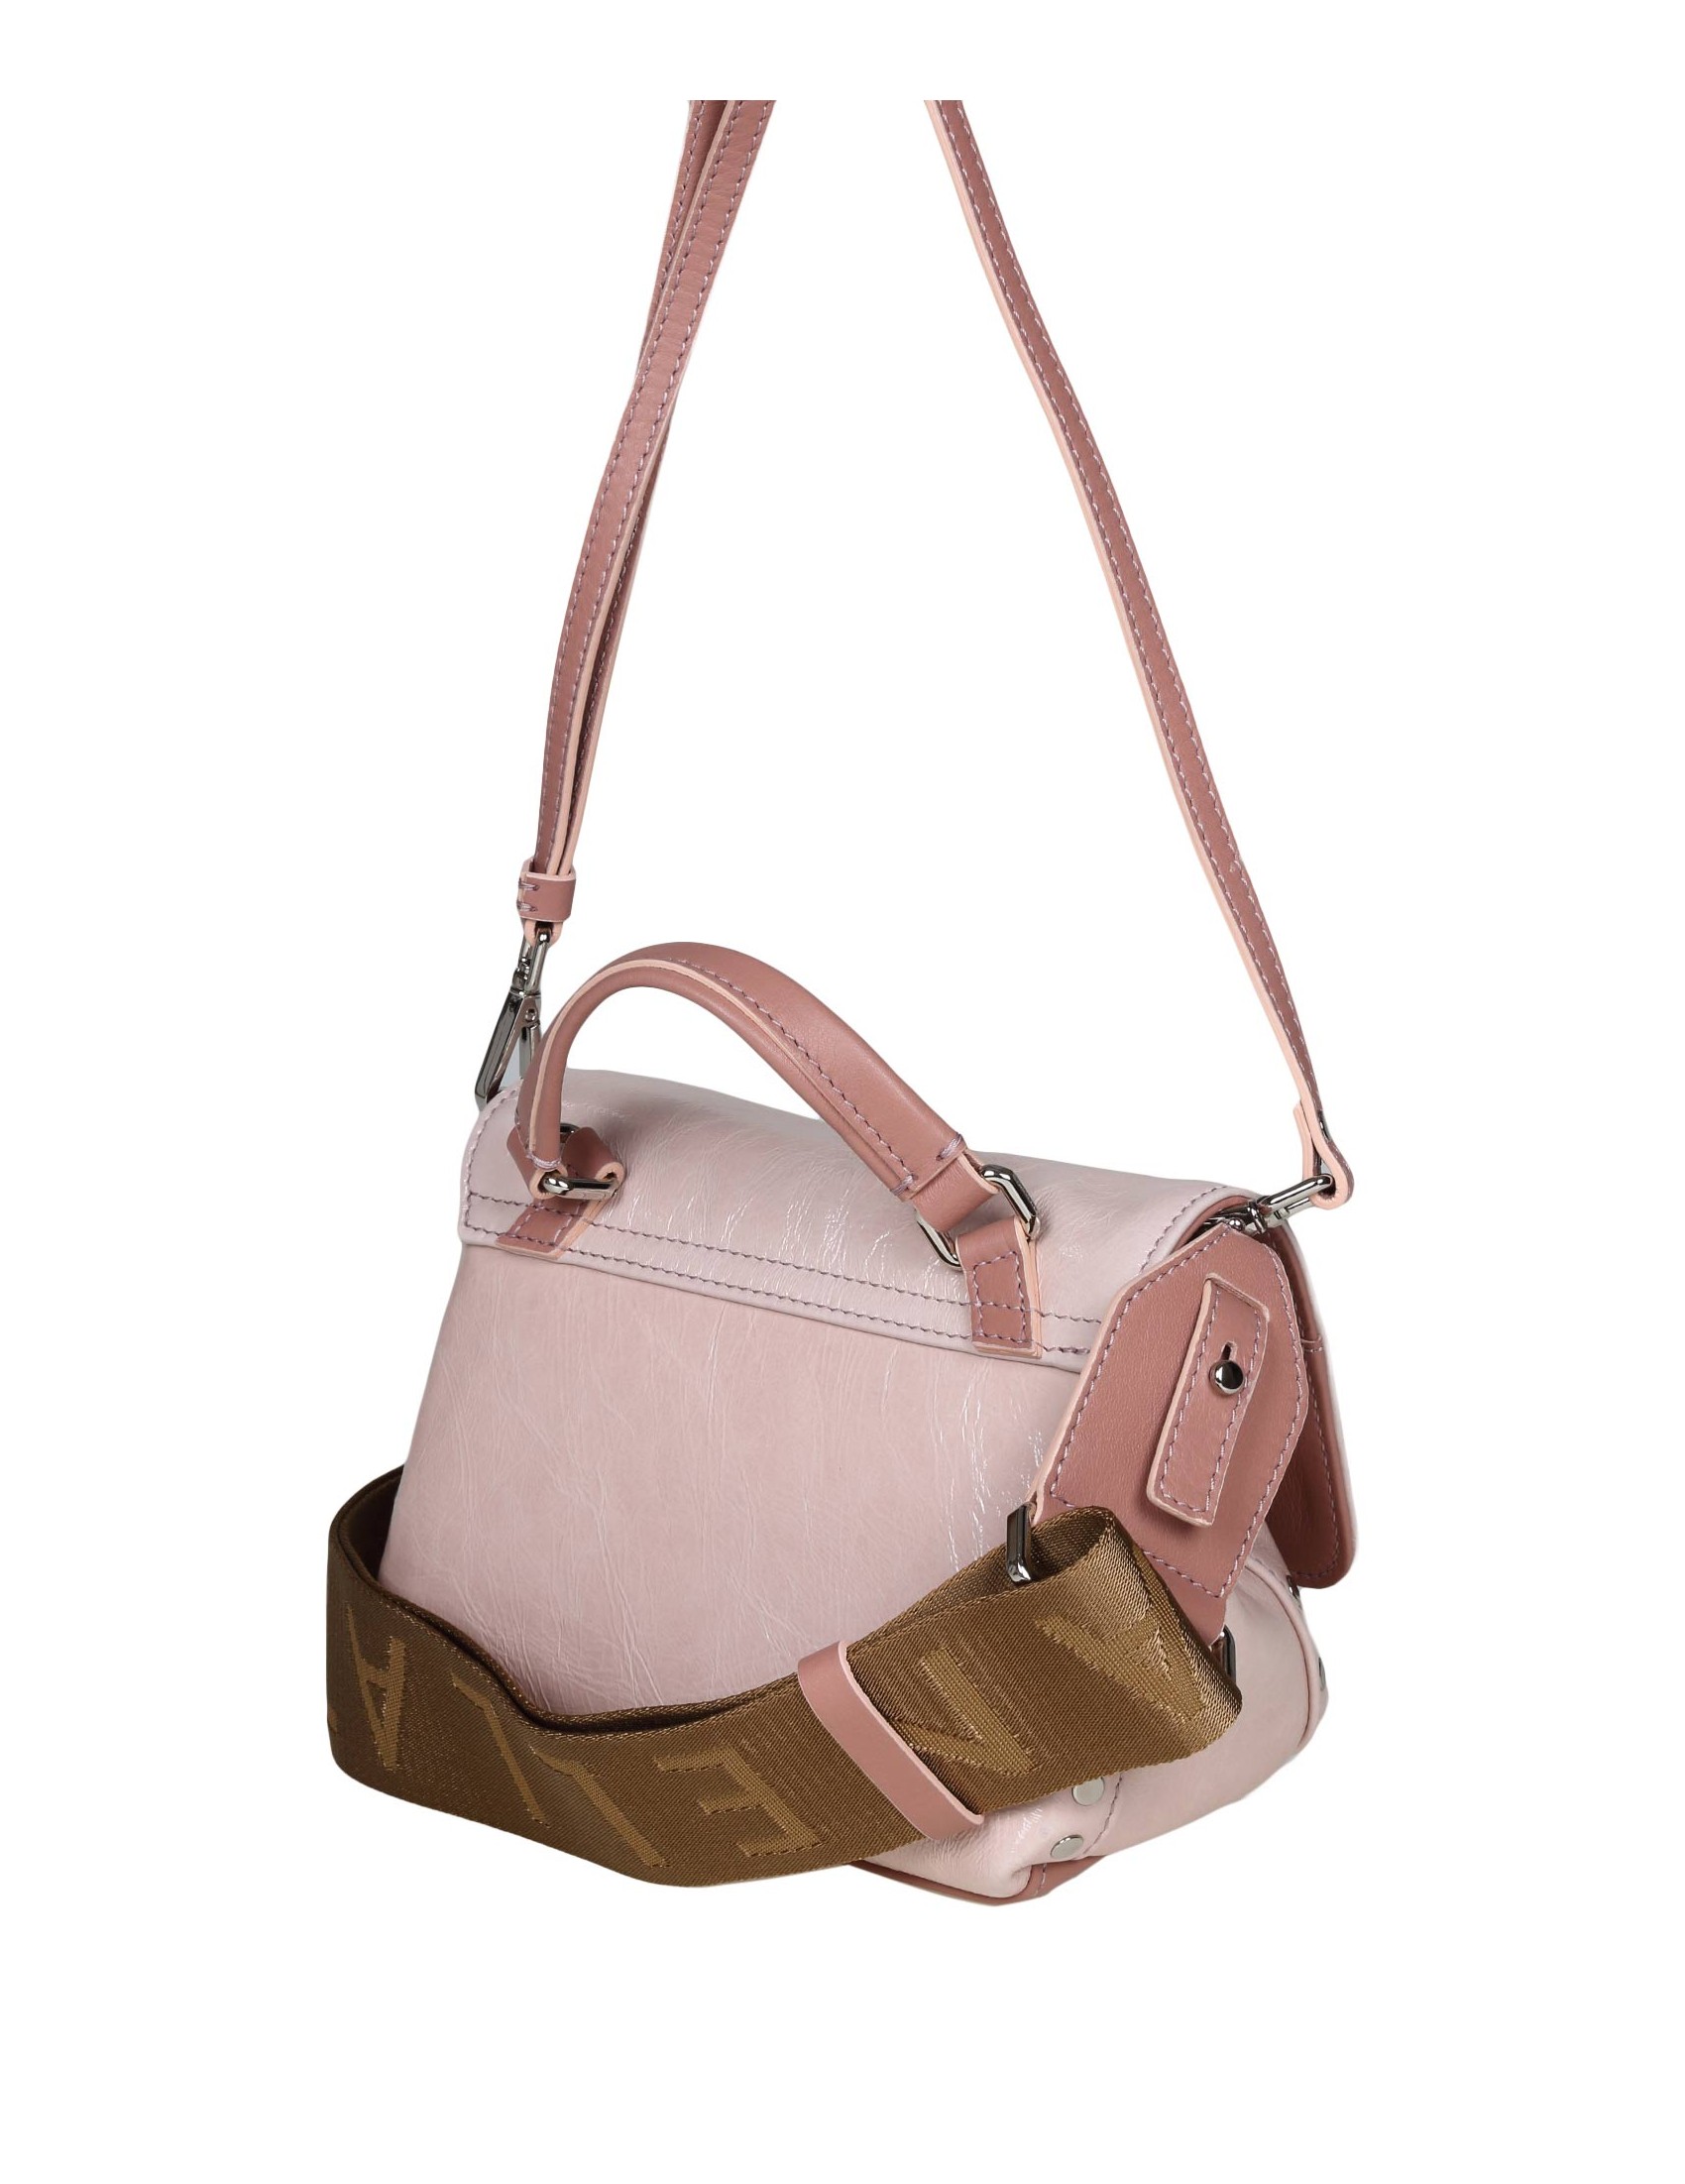 ZANELLATO POSTINA BABY CITY OF ANGELS IN PINK LEATHER